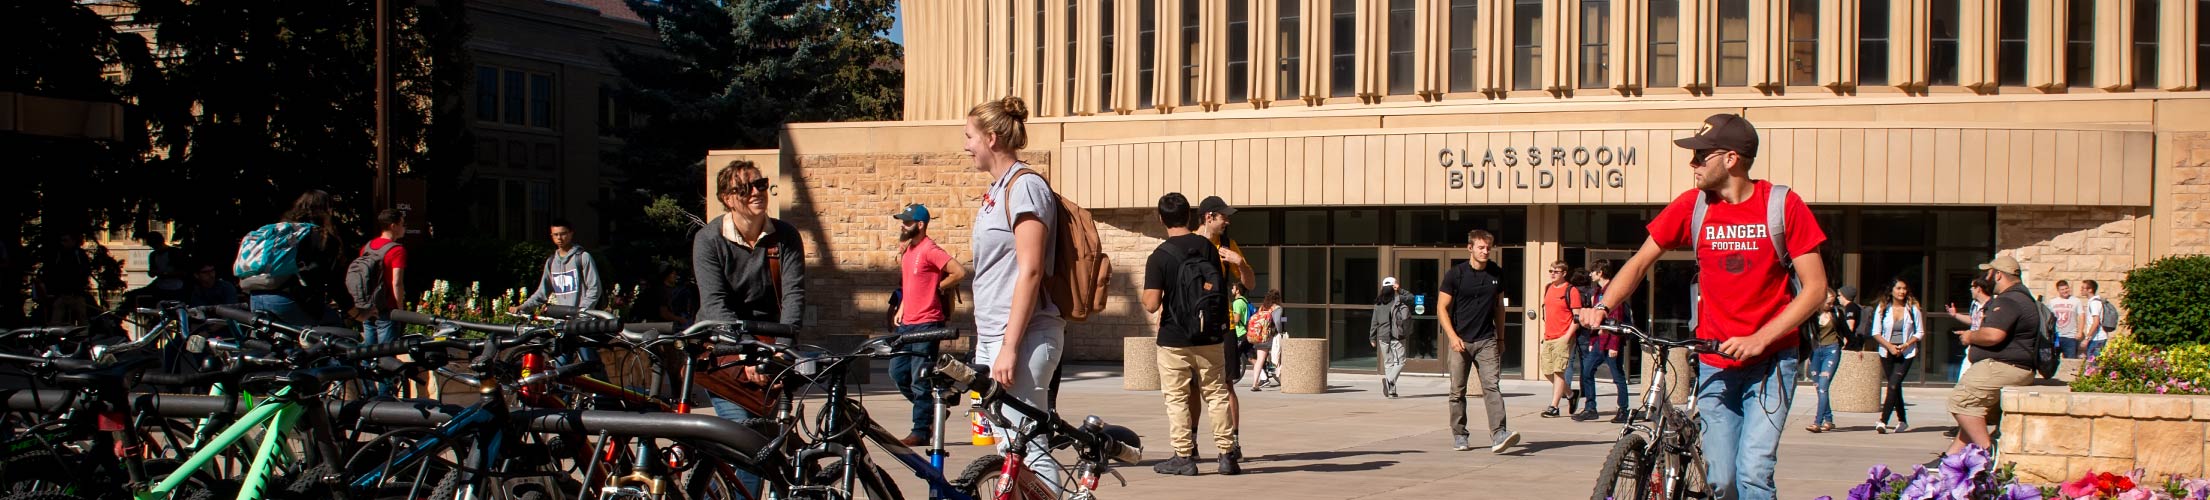 Picture of students walking and biking on campus.